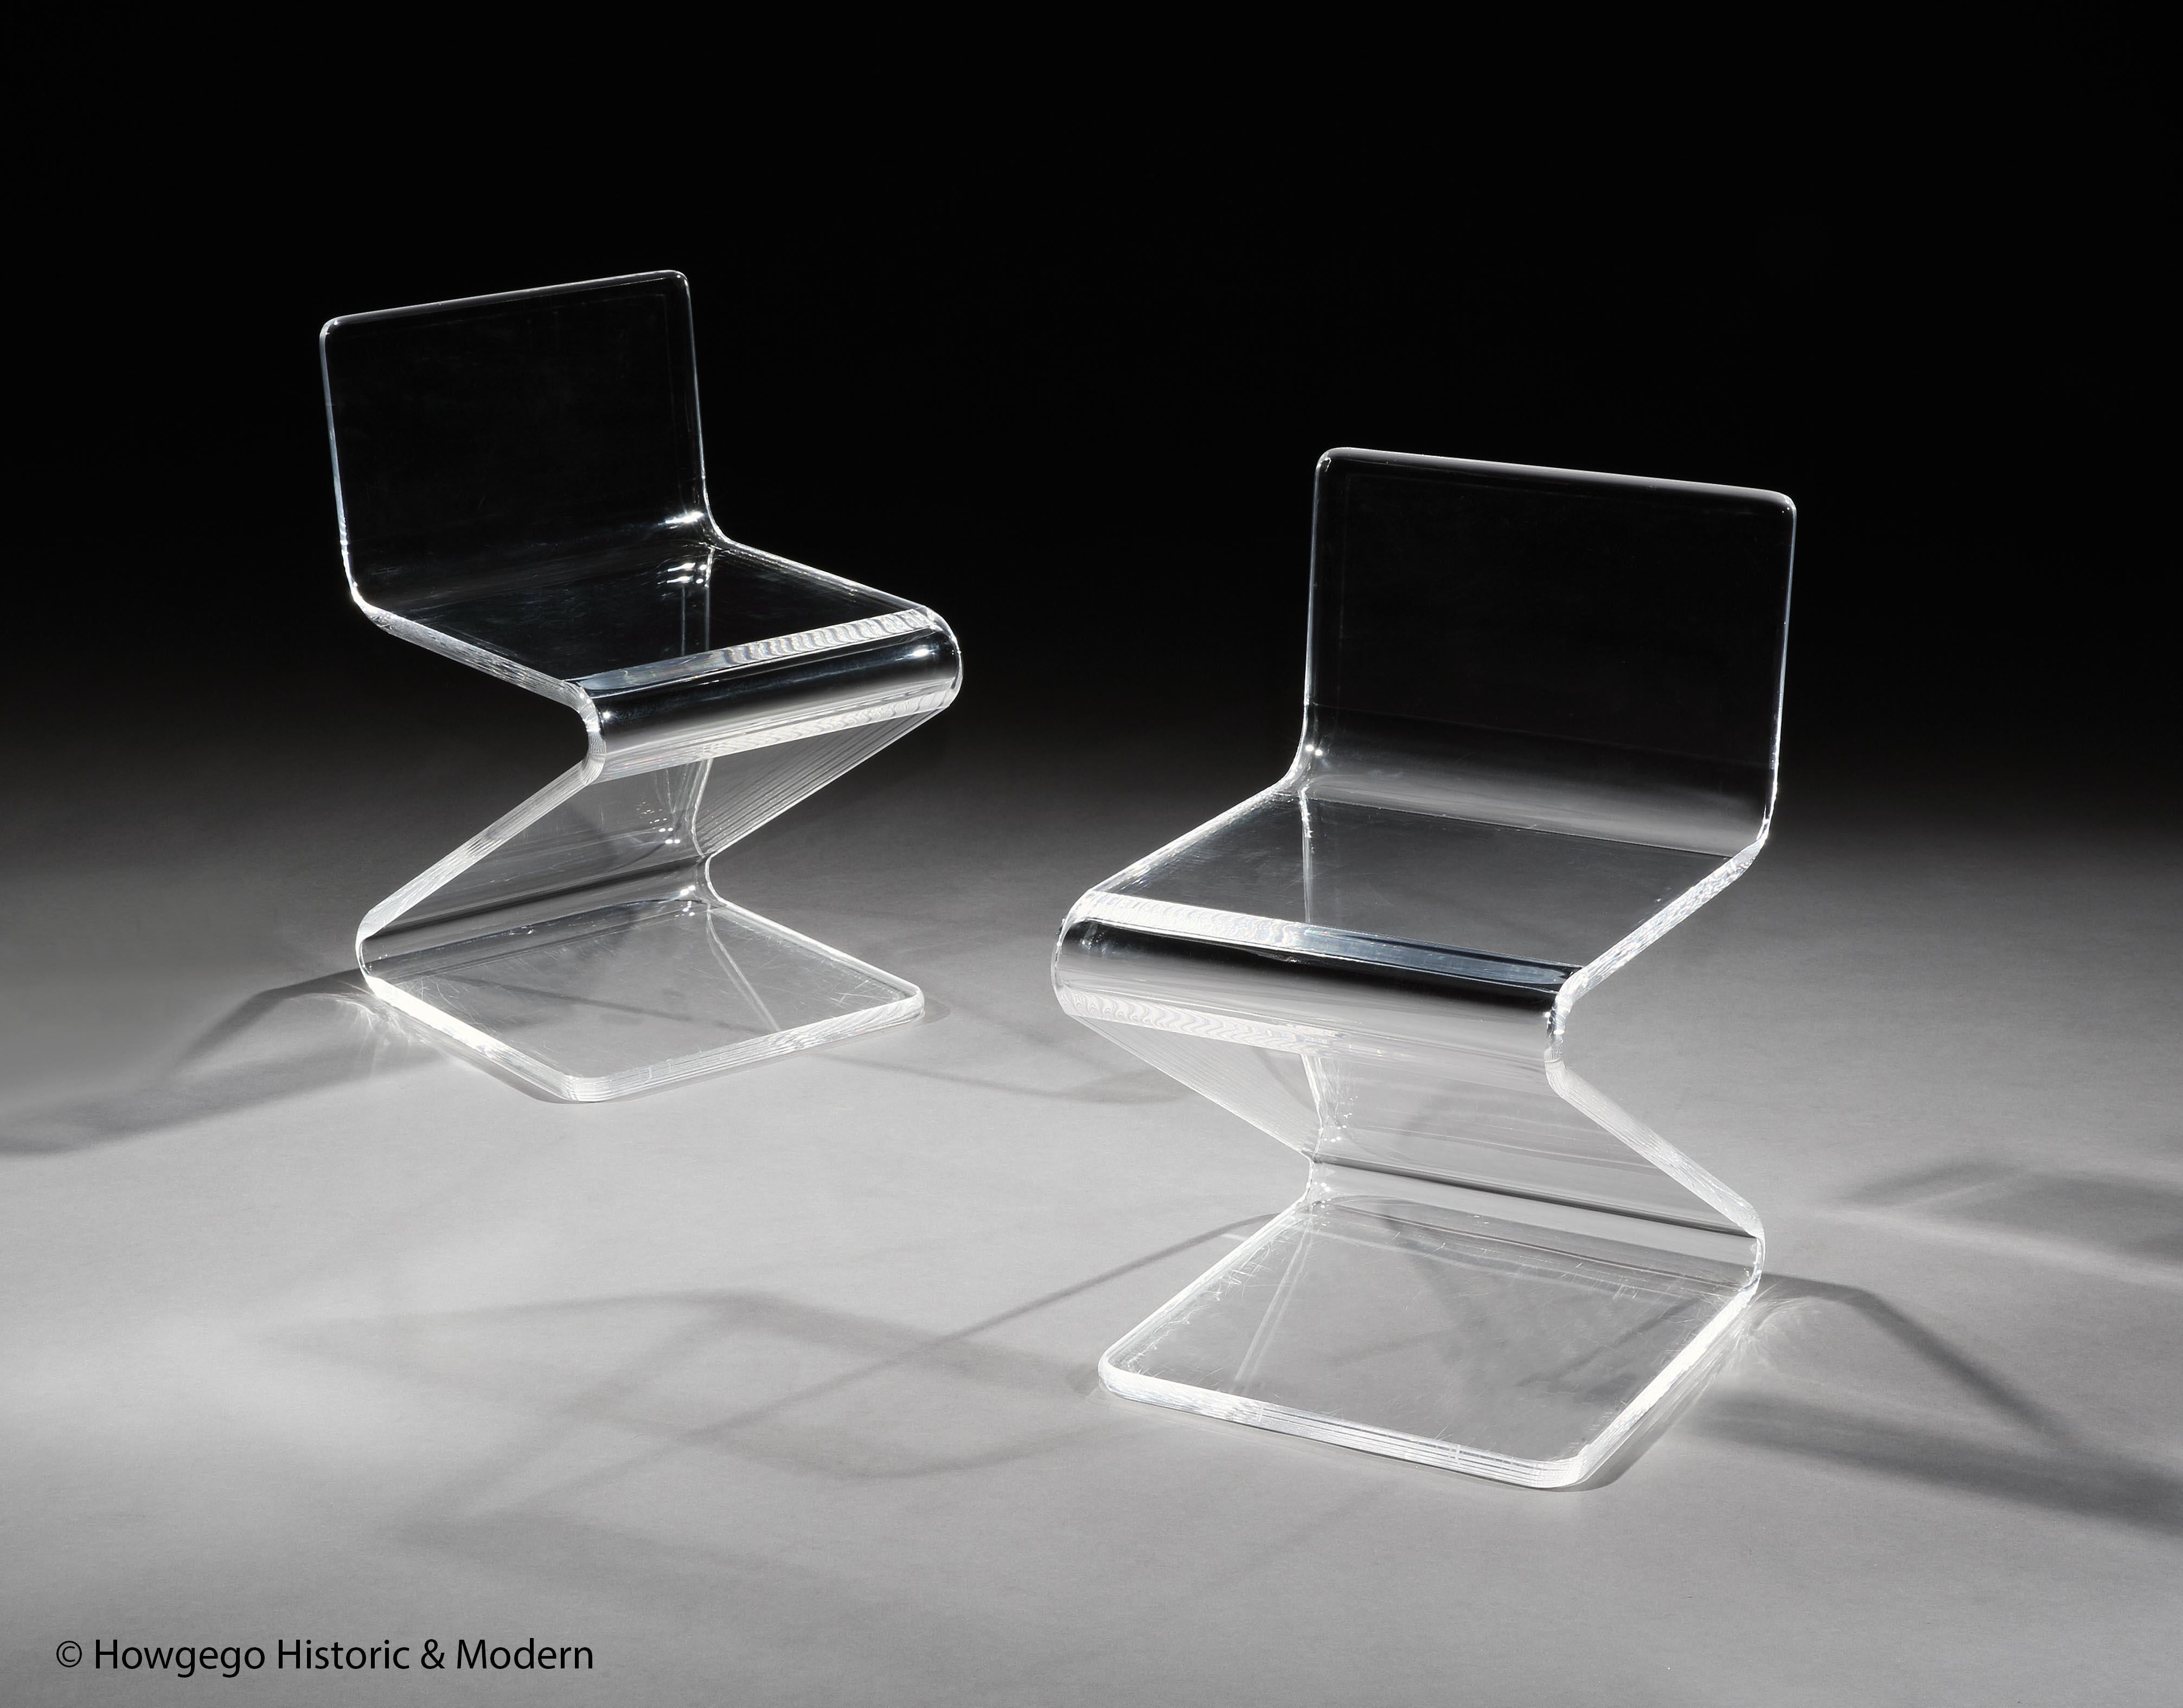 A PAIR OF VINTAGE, LUCITE OR PLEXIGLASS, CANTILEVER, ‘Z’ CHAIRS
- Stylish minimalist design with distinctive low backs creating suitability for different functions: seating, occasional tables or display stands
- Each chair is cut from a single